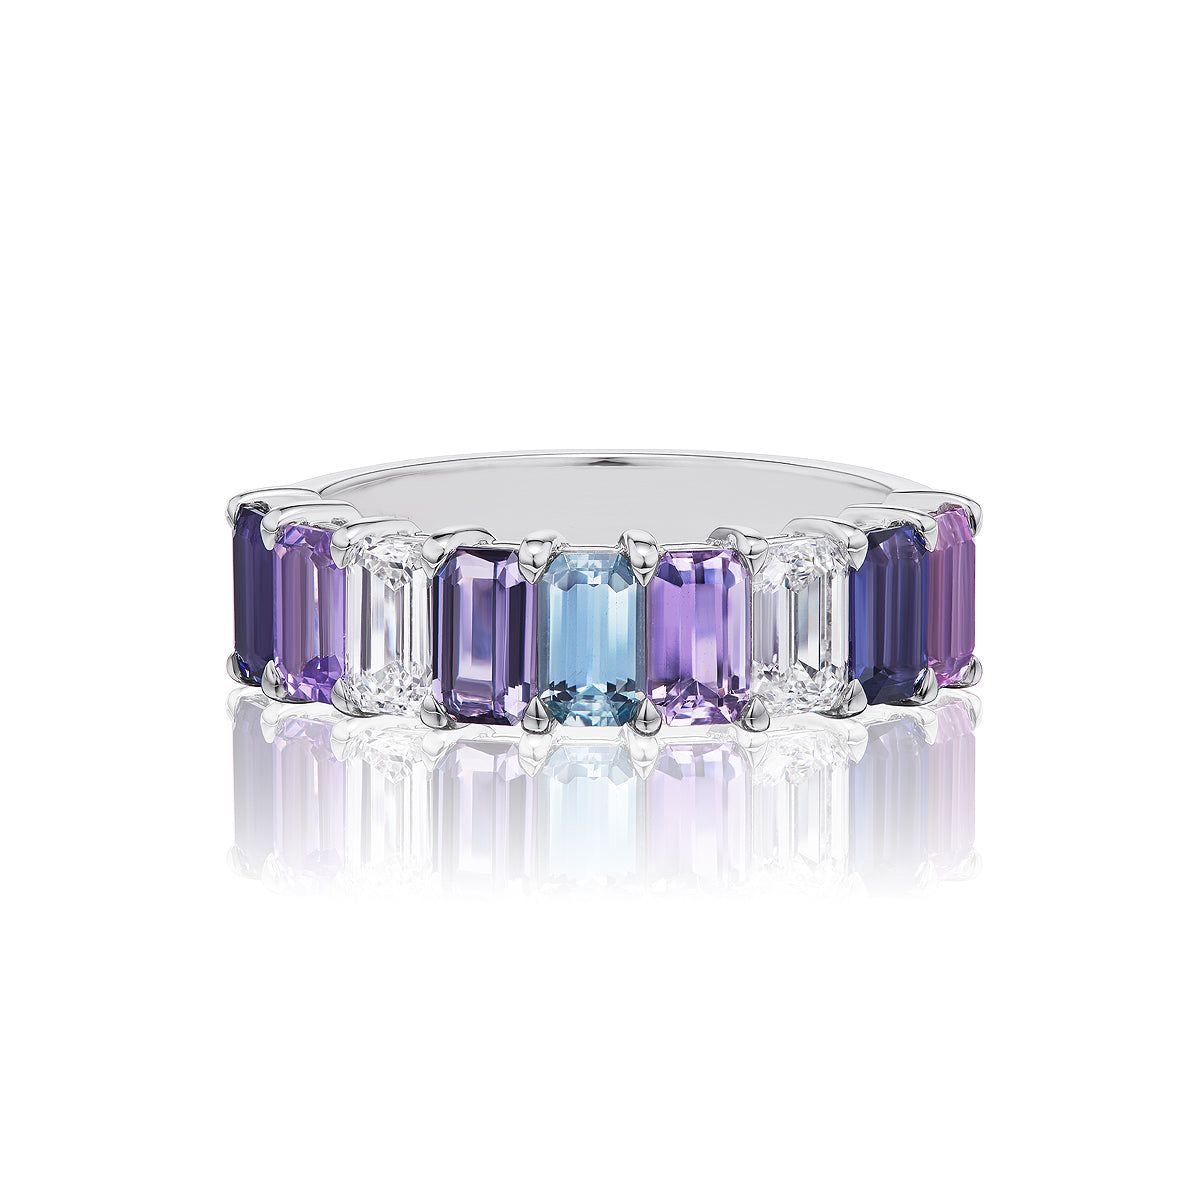 Emerald Cut Half Eternity Band in White Gold with Diamonds and Multicolored Sapphires